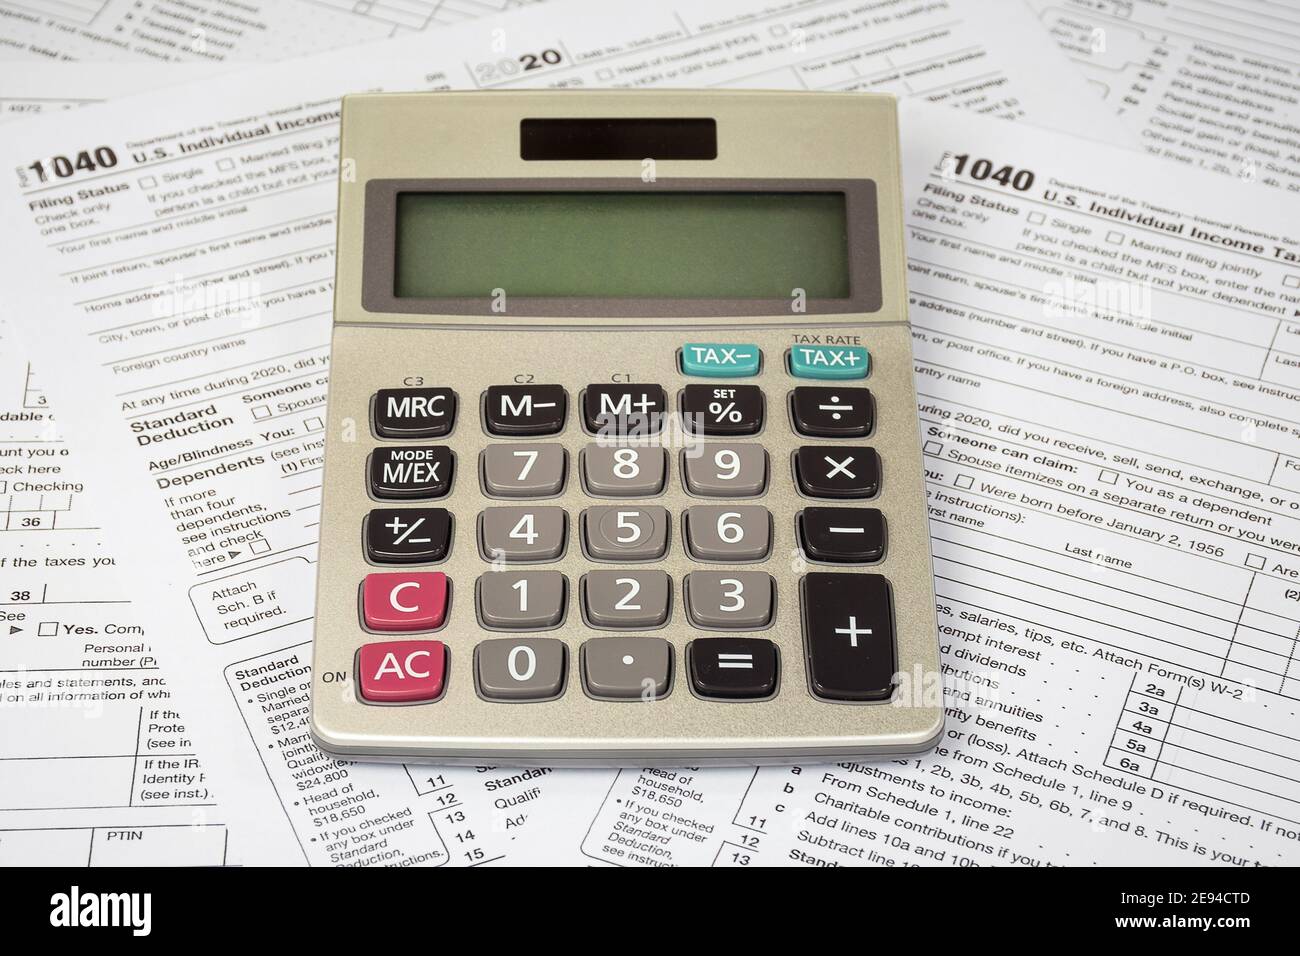 calculator with blank screen on 2020 Internal Revenue Service 1040 tax forms Stock Photo